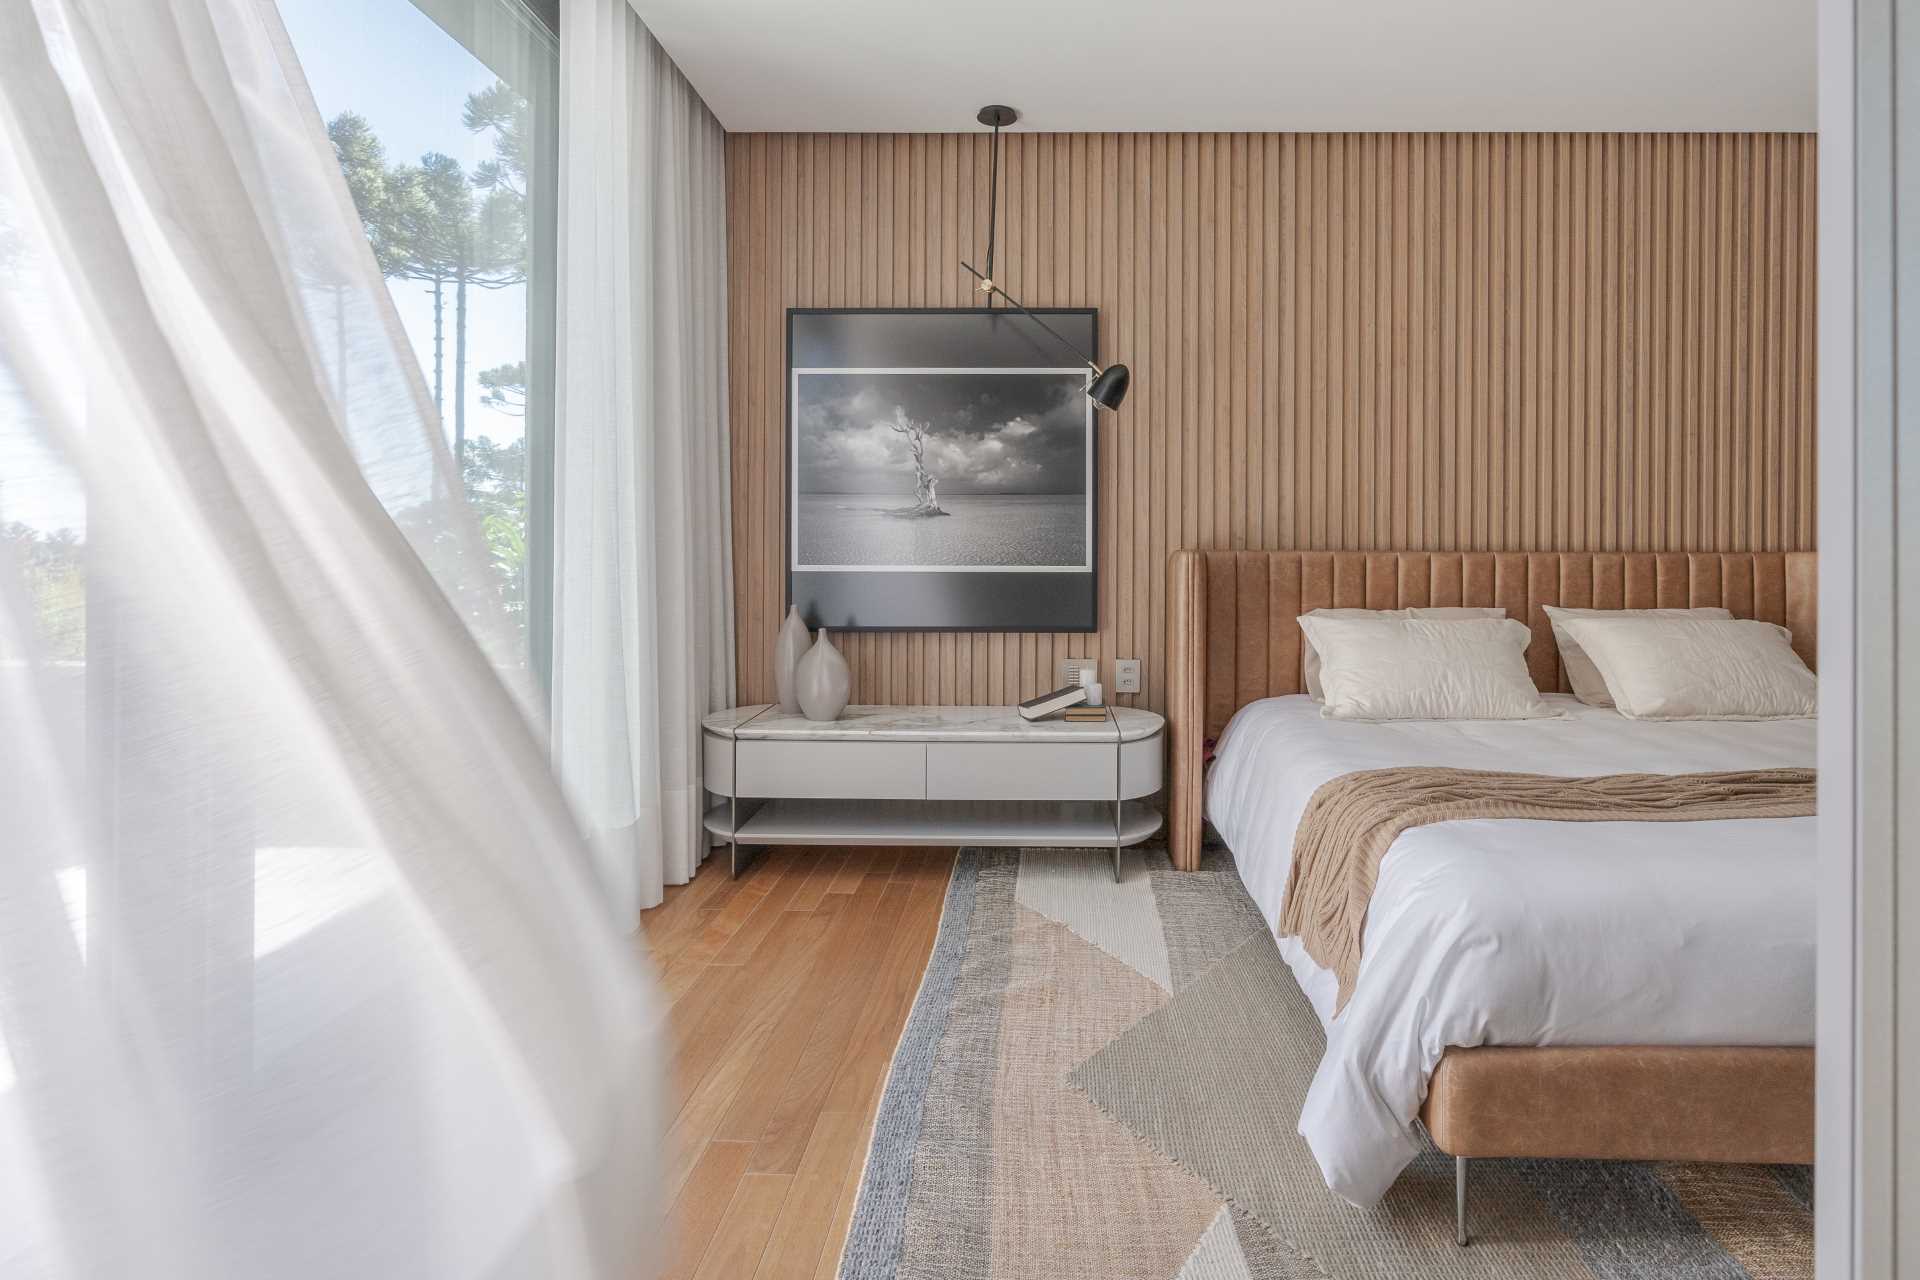 In this modern primary bedroom, vertical wood strips line the wall, while the bed has a curved padded headboard.